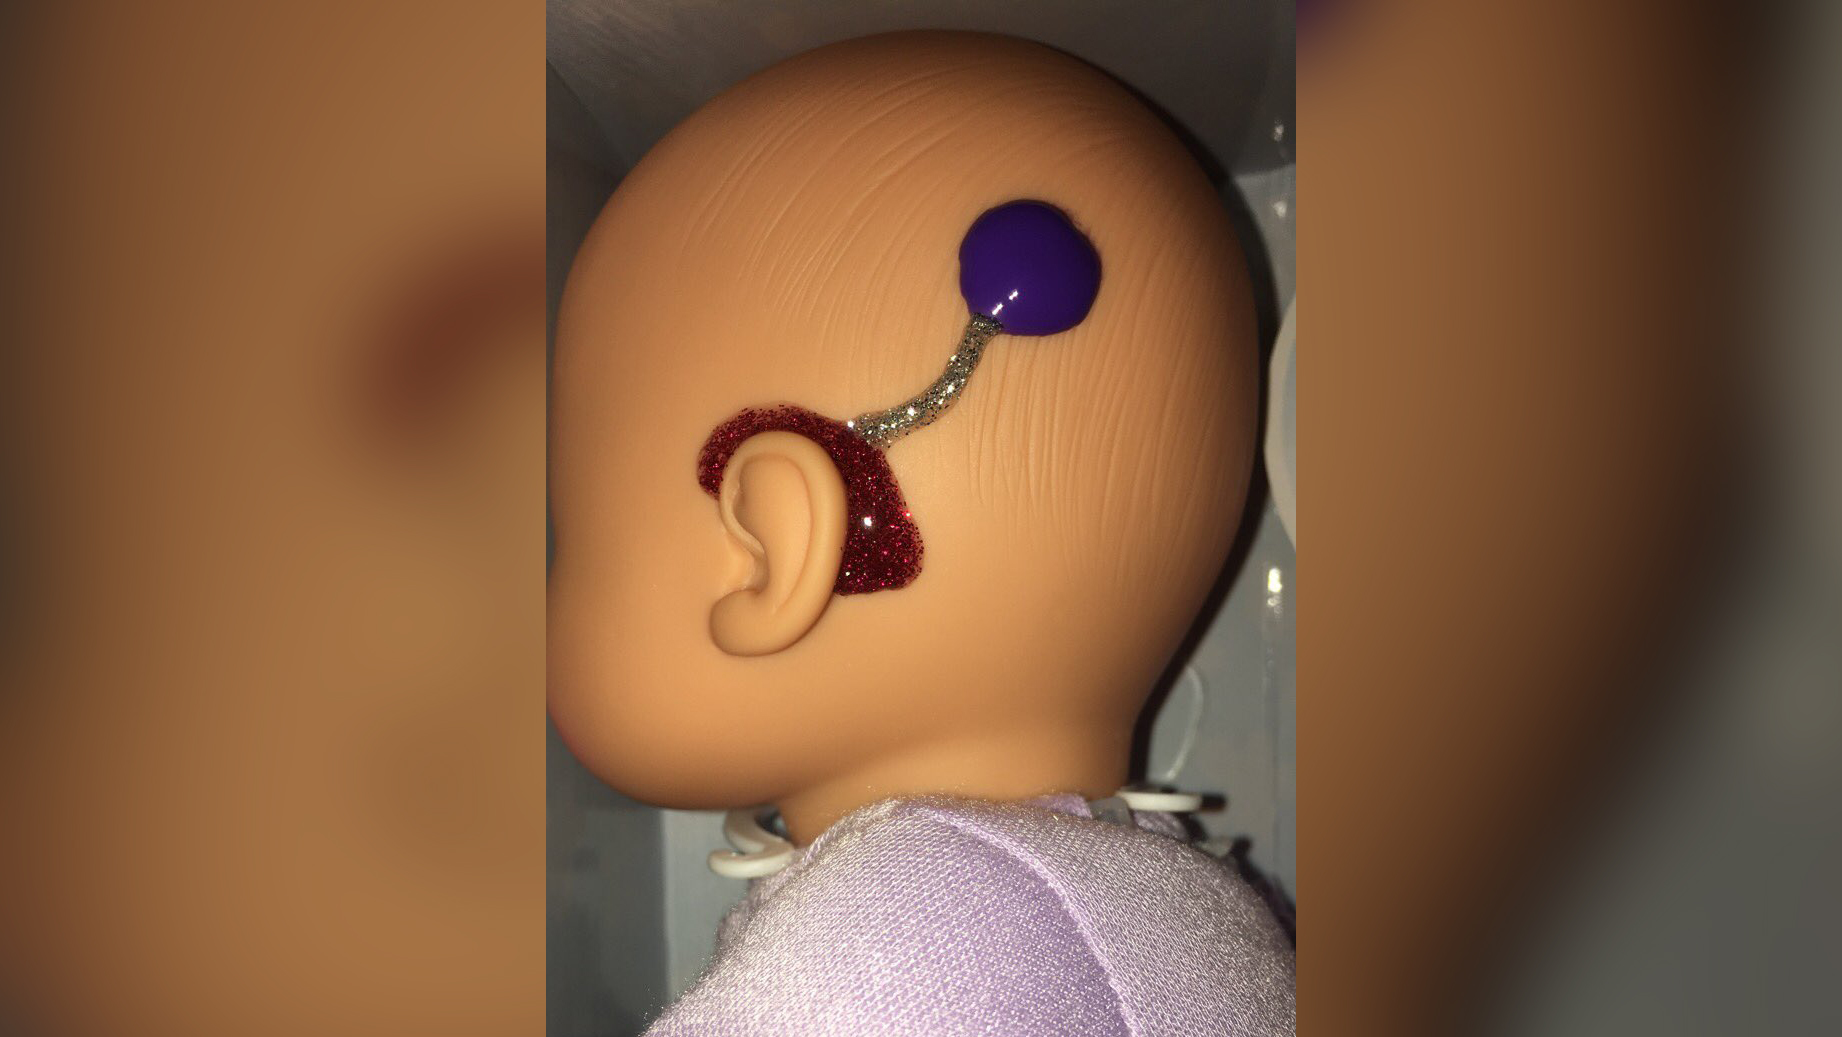 A teacher designed glittery hearing aids on dolls to make her deaf students  feel represented - CNN